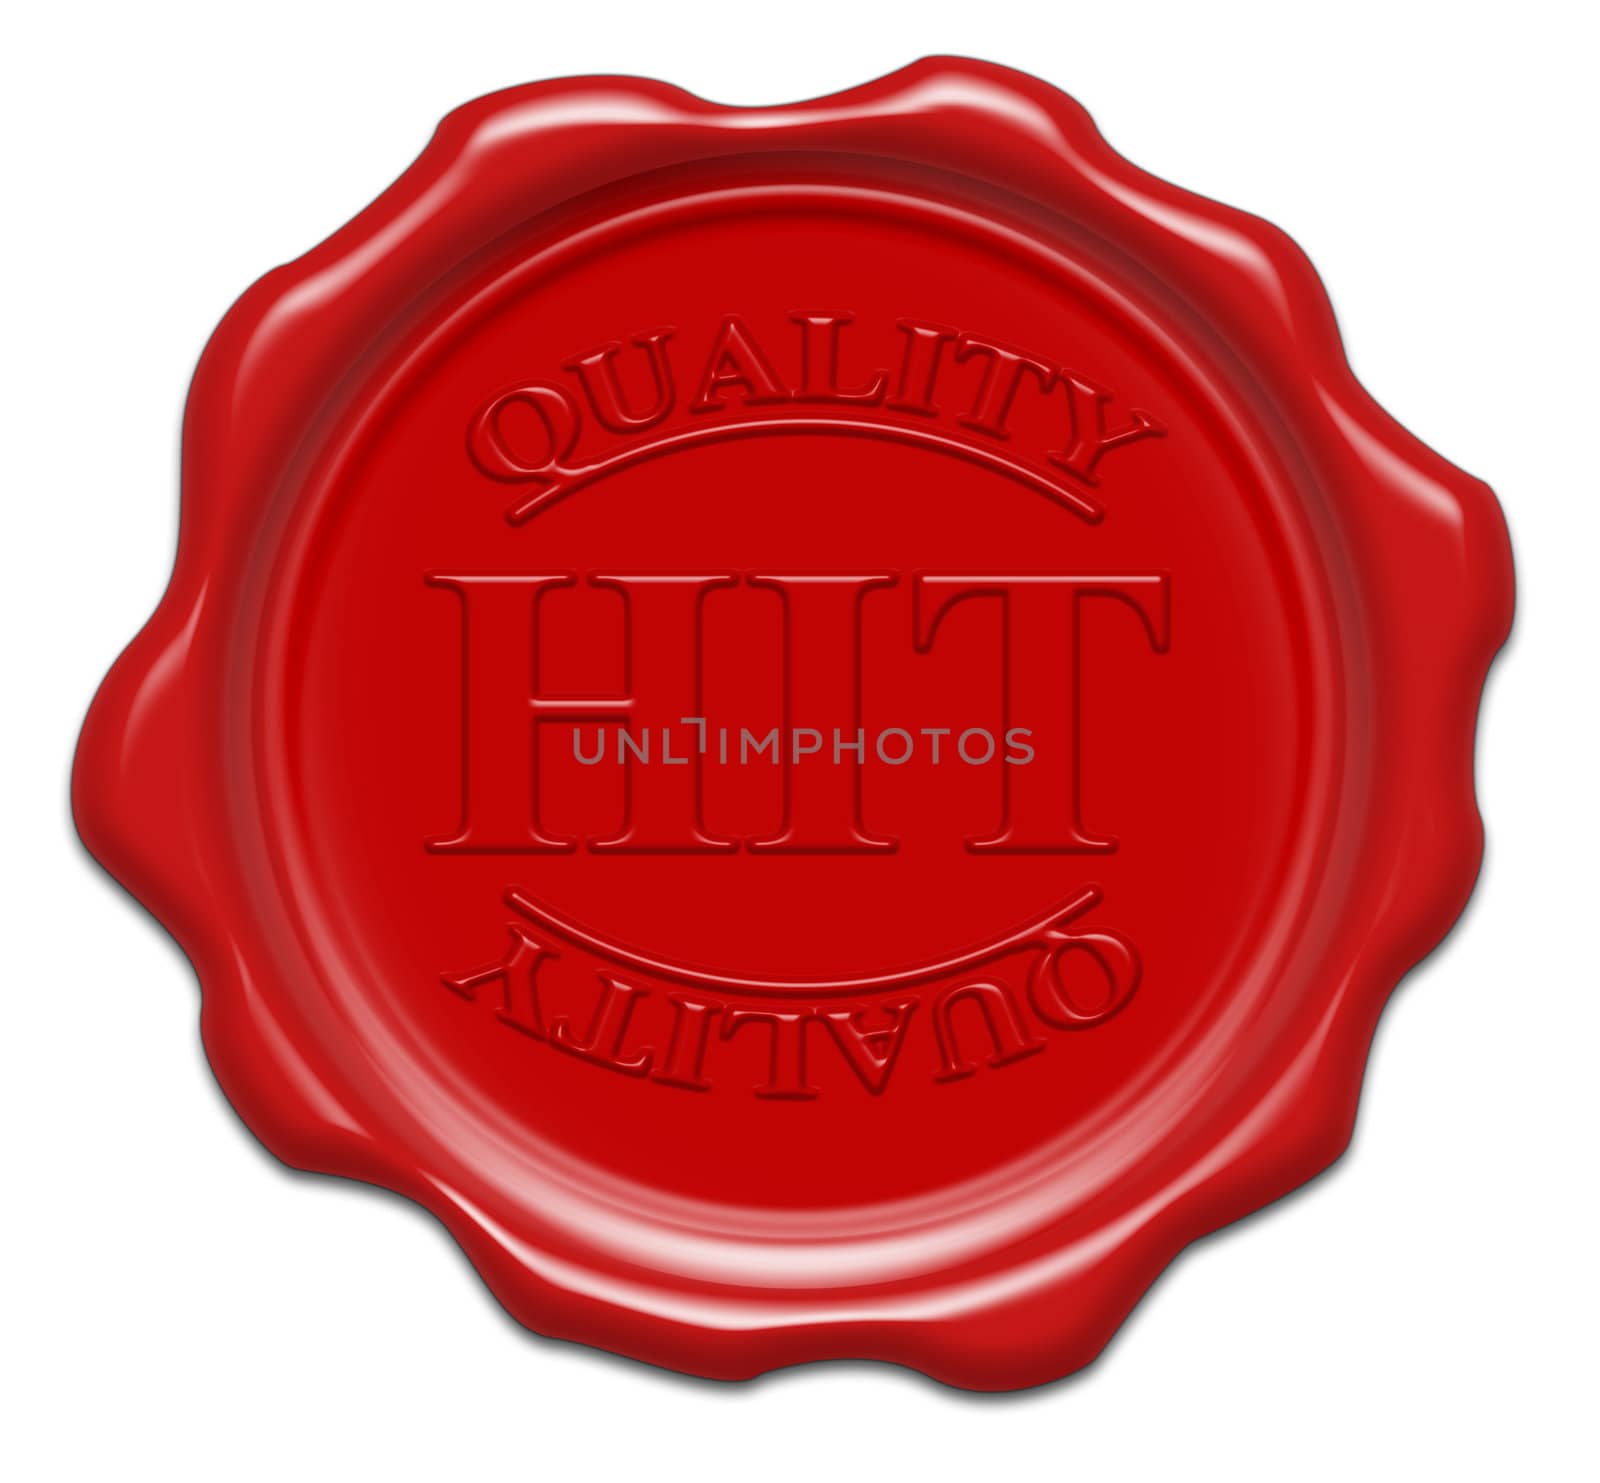 quality hit - illustration red wax seal isolated on white background with word : hit